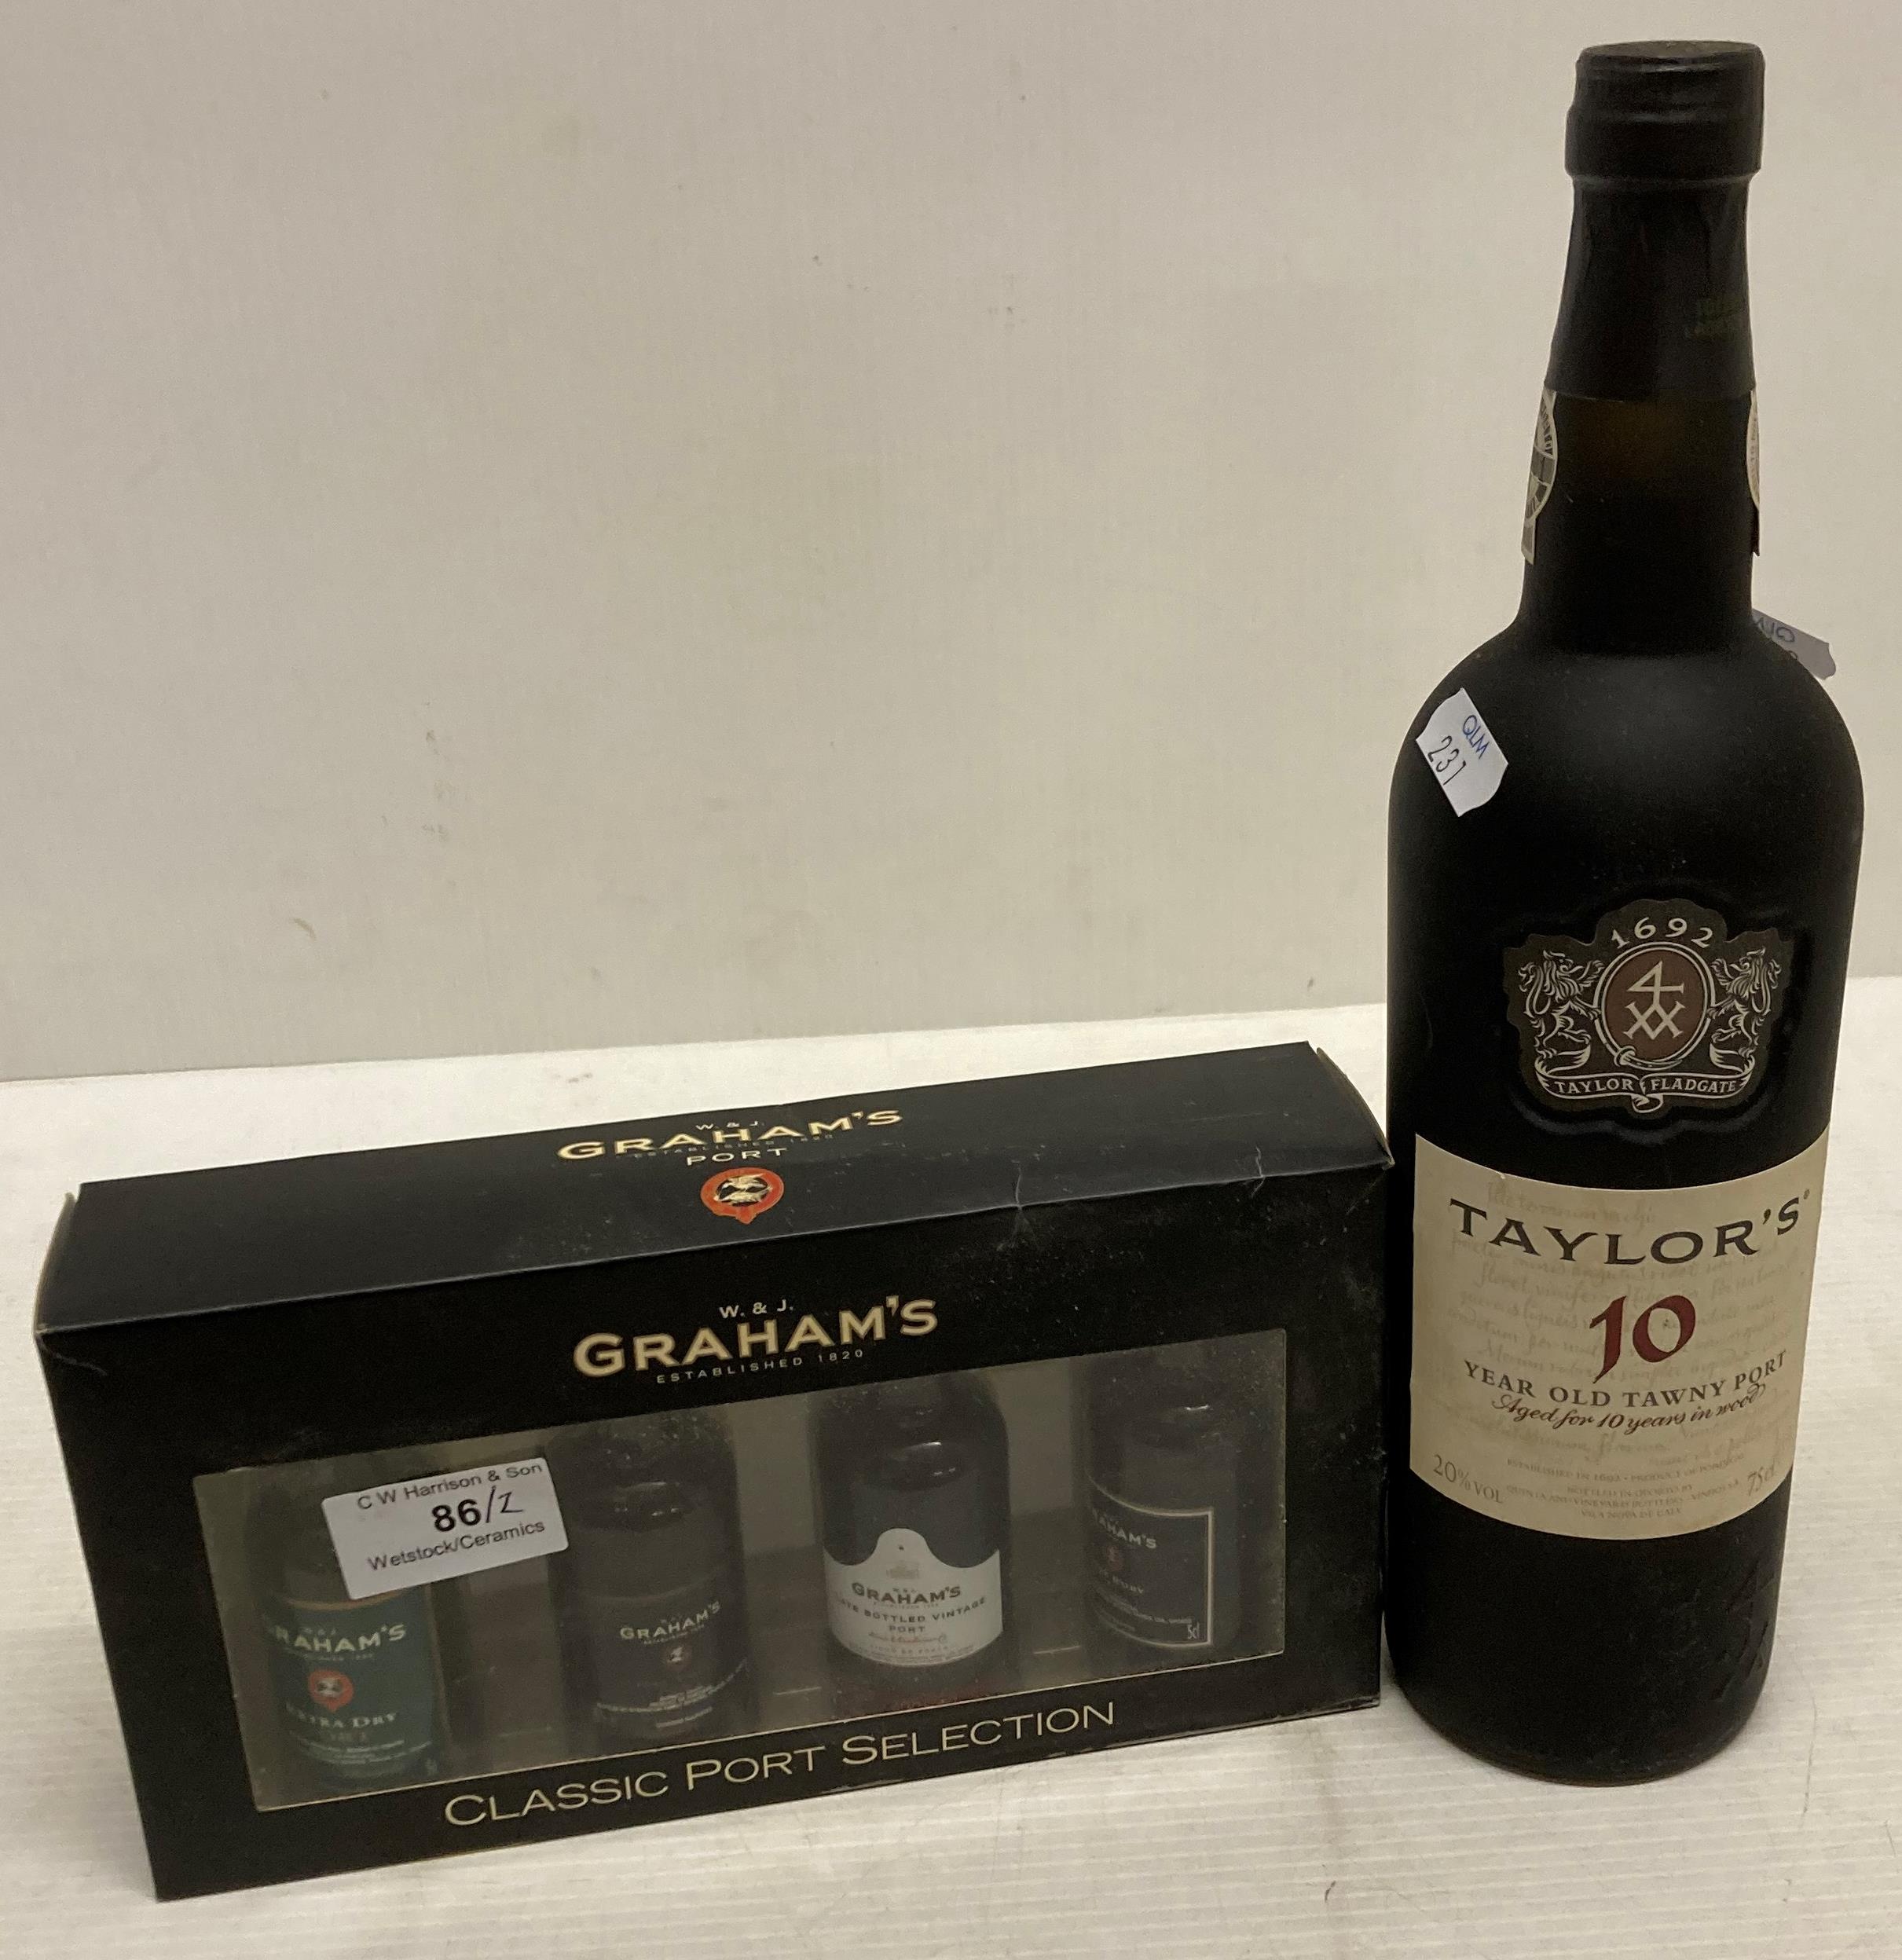 A 75cl bottle of Taylor's four star ten year old Tawny Port and a W & J Graham's four bottle